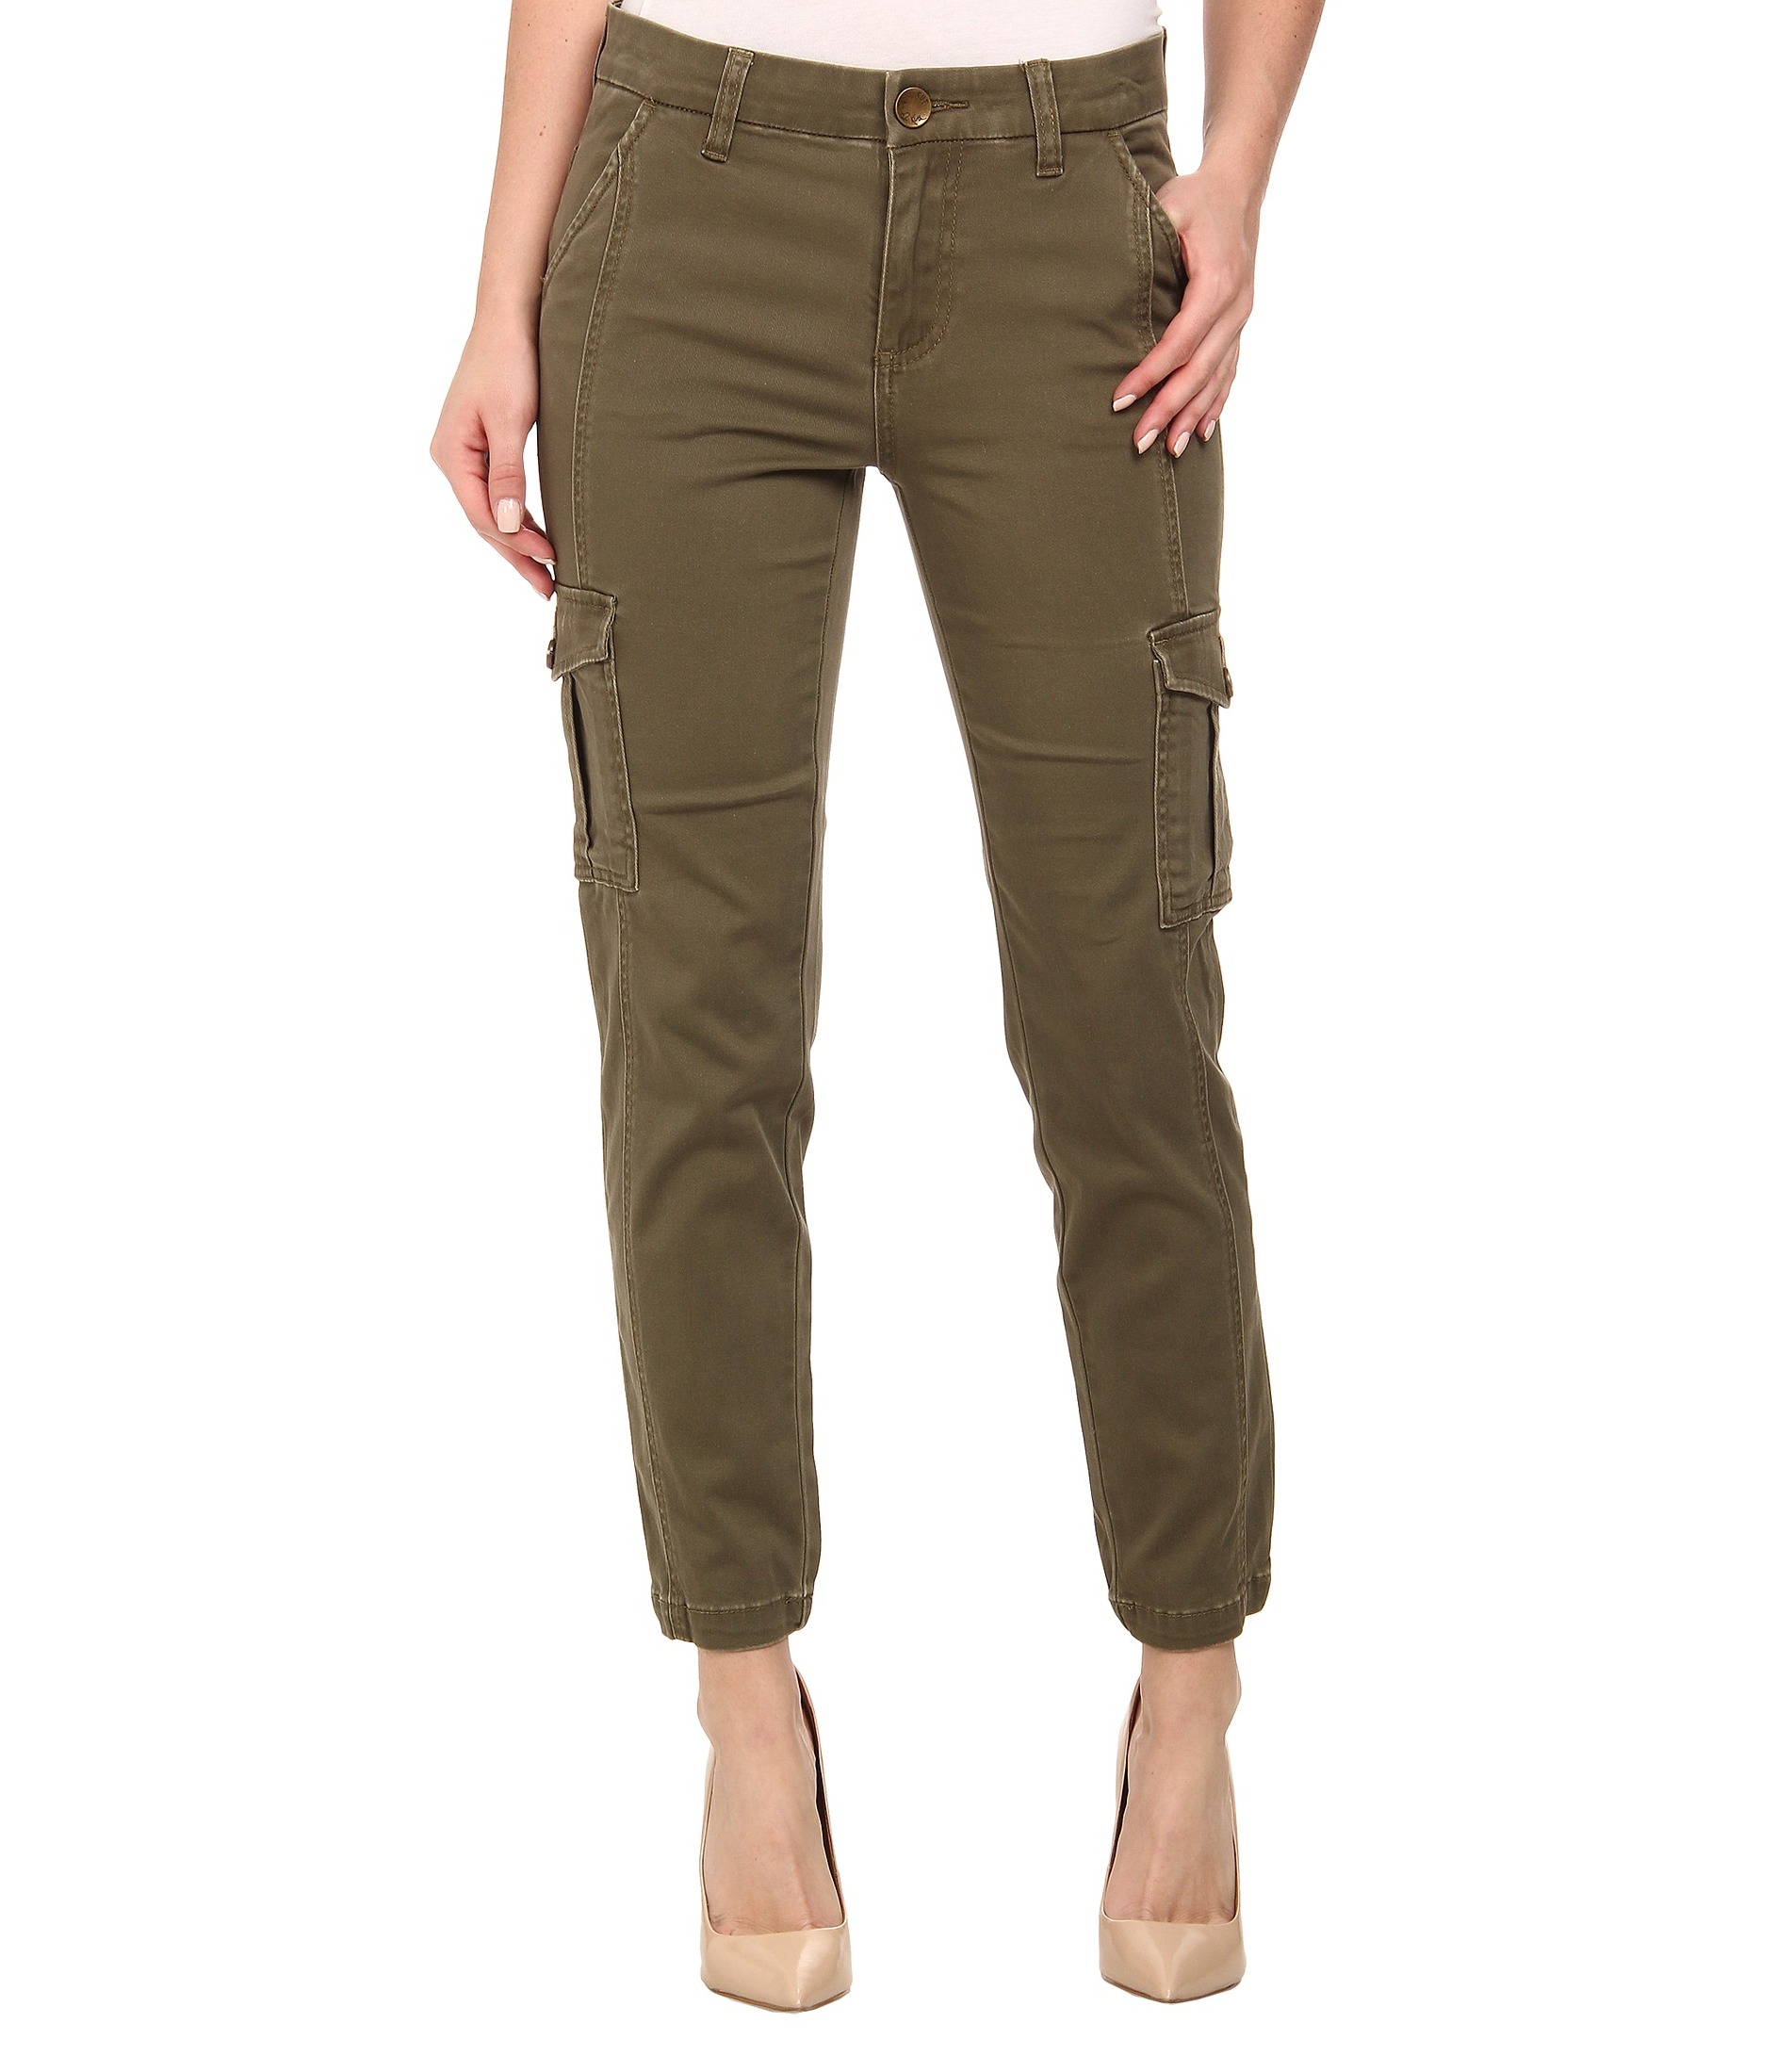 KUT from the Kloth - Kut from the Kloth NEW Green Womens Size 8 Stretch ...